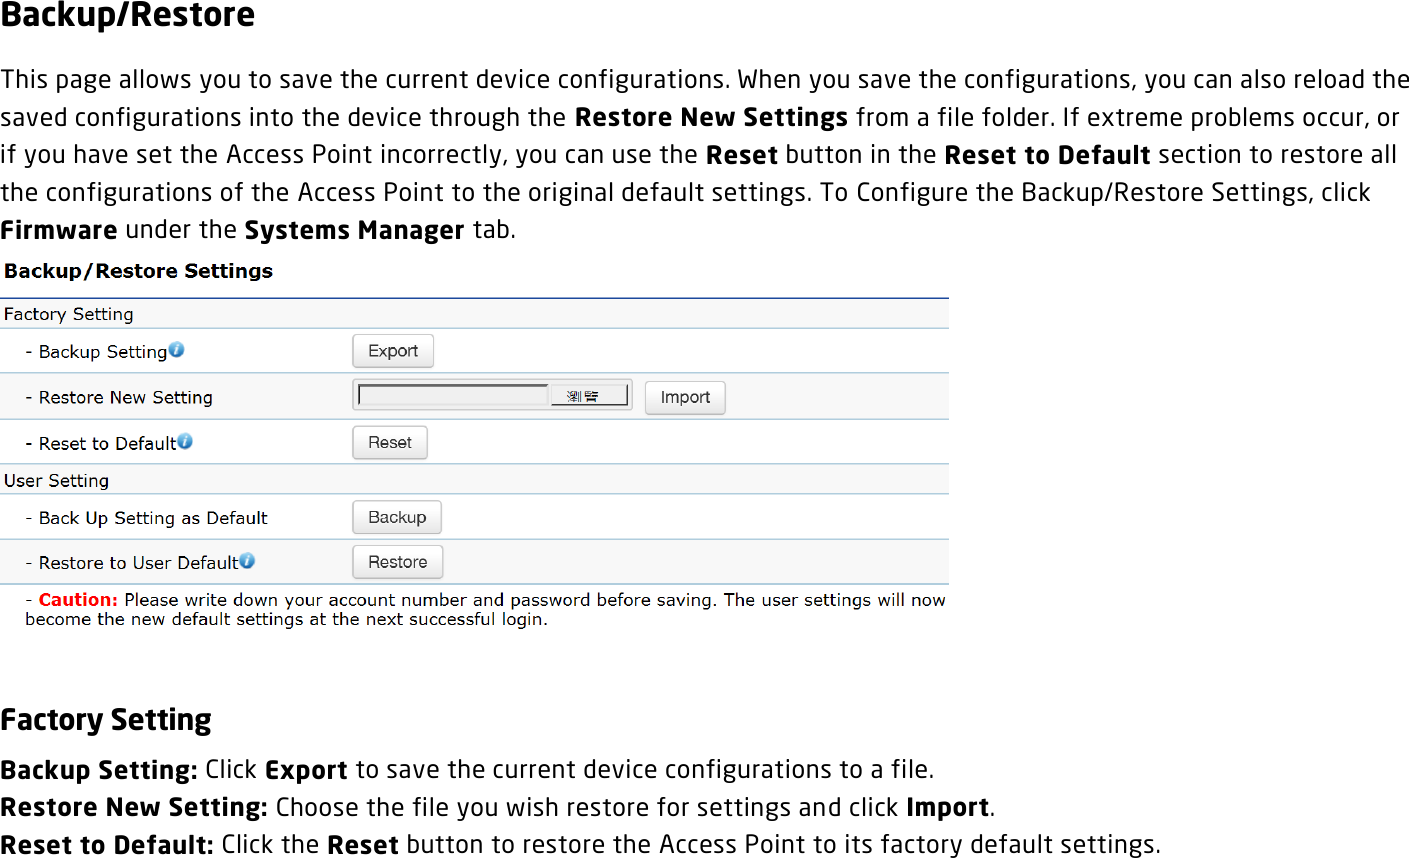 Backup/Restore This page allows you to save the current device configurations. When you save the configurations, you can also reload the saved configurations into the device through the Restore New Settings from a file folder. If extreme problems occur, or if you have set the Access Point incorrectly, you can use the Reset button in the Reset to Default section to restore all the configurations of the Access Point to the original default settings. To Configure the Backup/Restore Settings, click Firmware under the Systems Manager tab.   Factory Setting Backup Setting: Click Export to save the current device configurations to a file. Restore New Setting: Choose the file you wish restore for settings and click Import. Reset to Default: Click the Reset button to restore the Access Point to its factory default settings.  